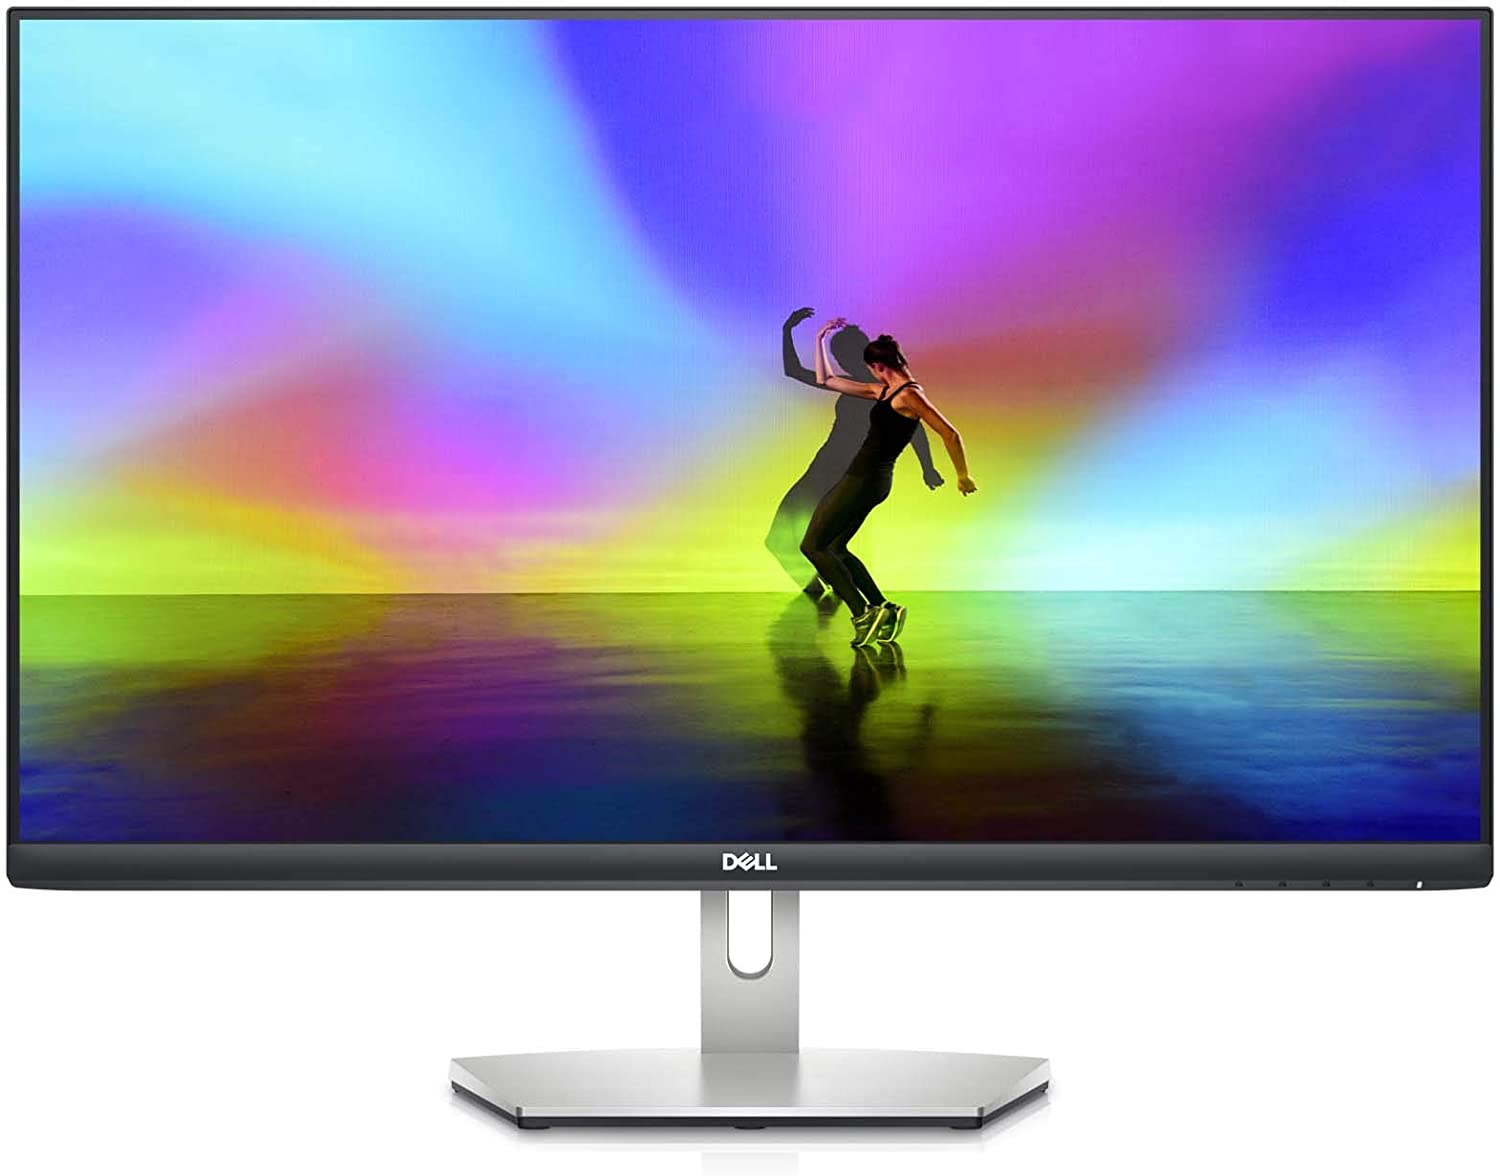 Best external monitor for college students: Dell